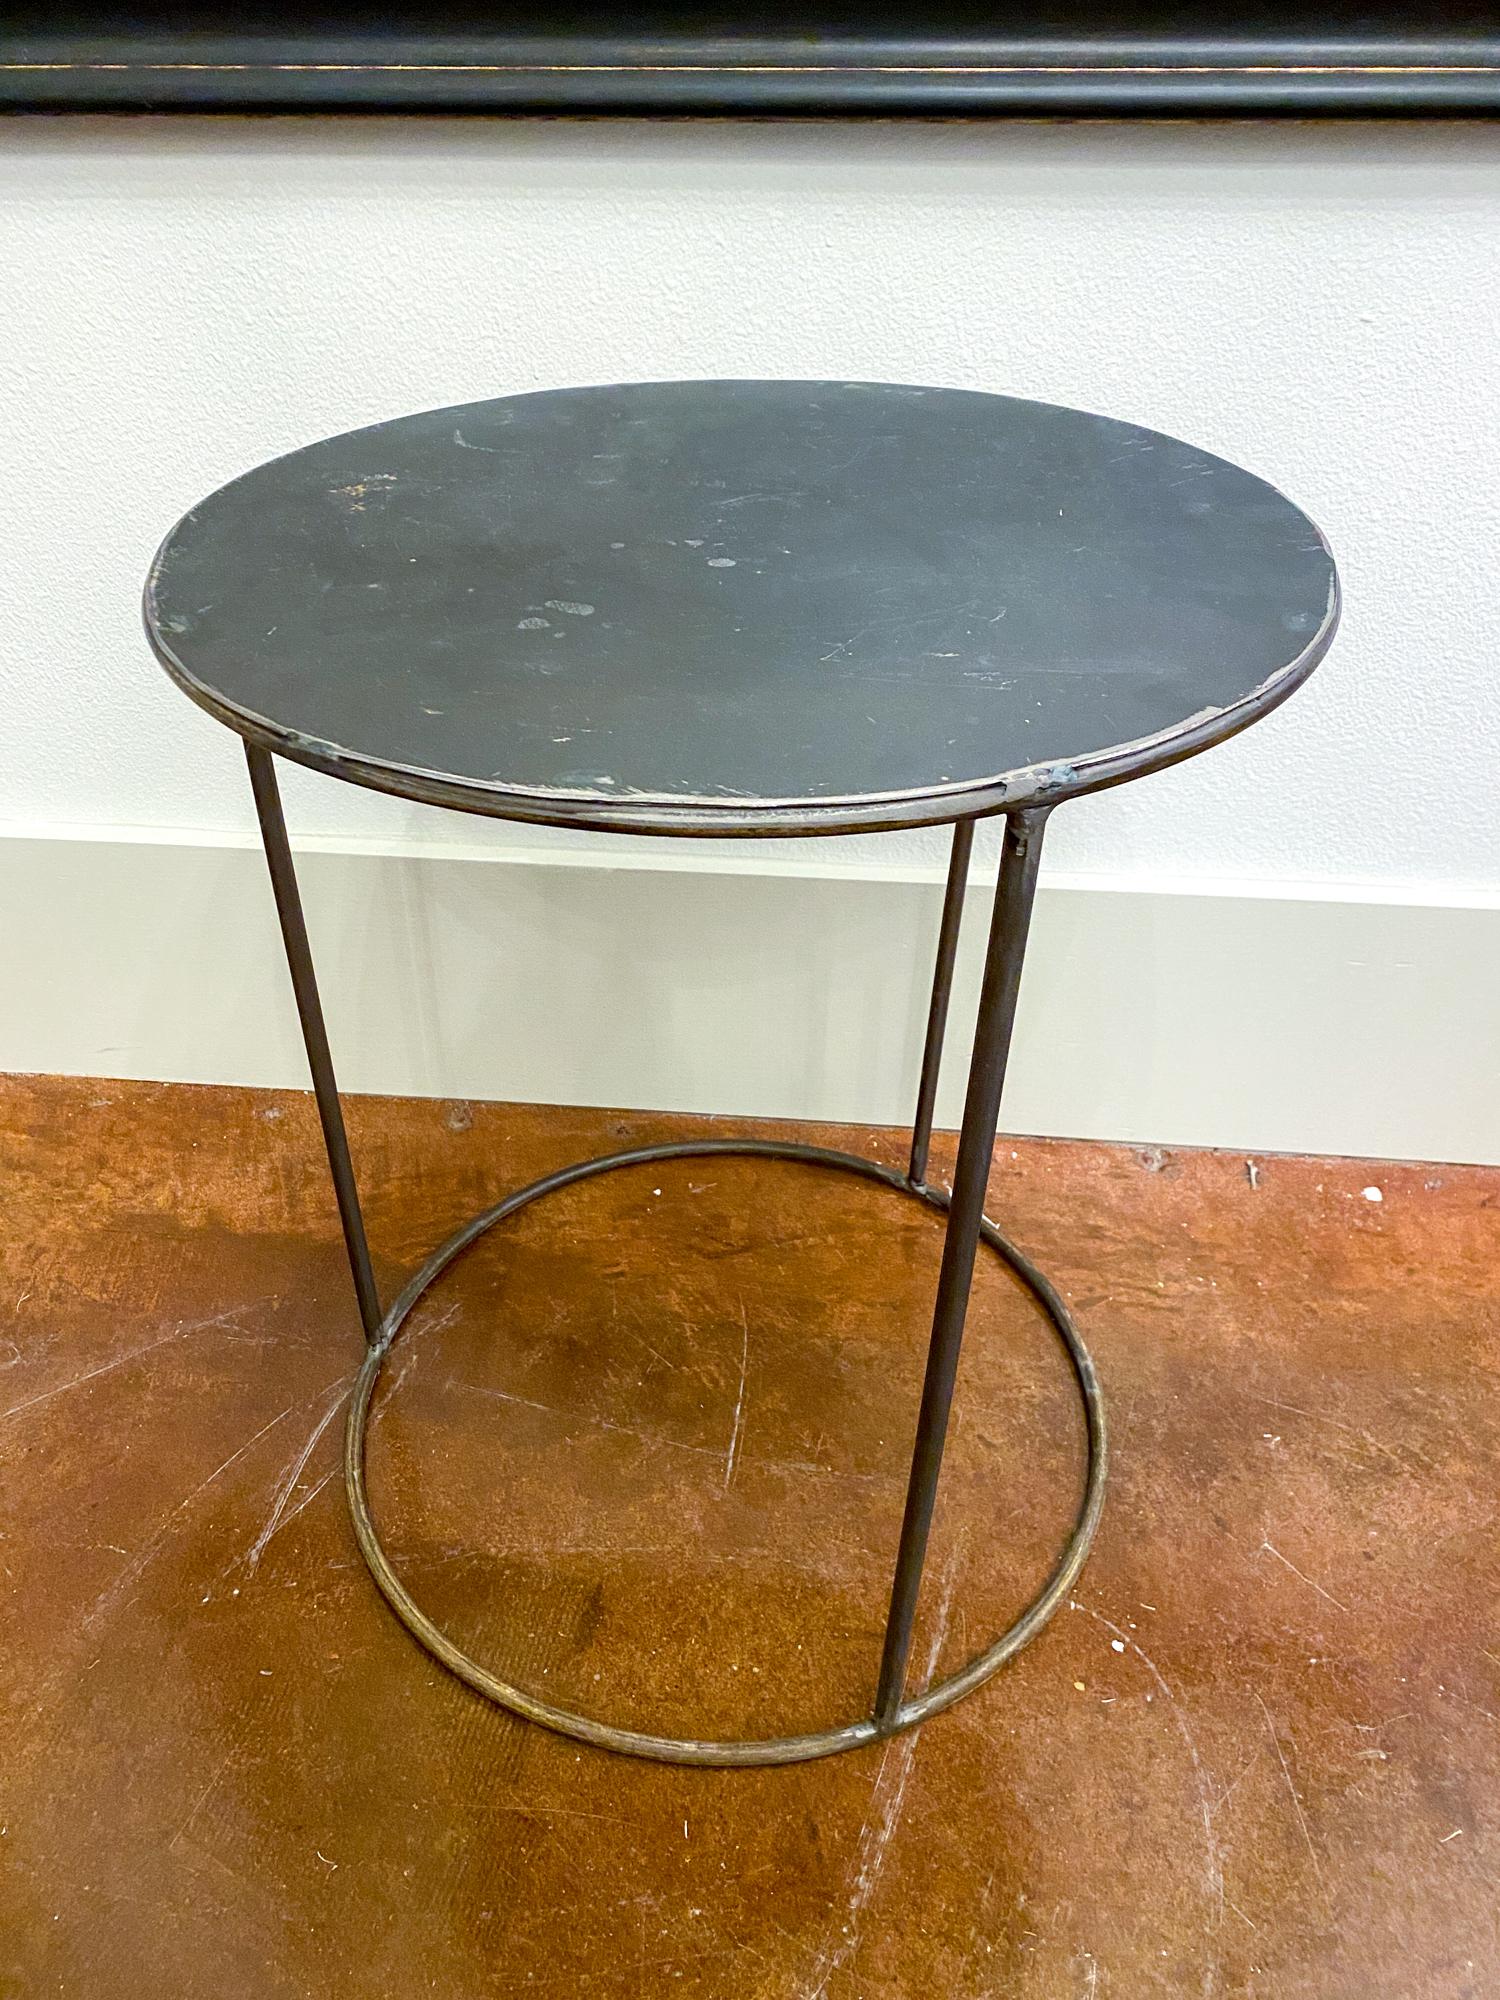 This is a funky and simple vintage French metal side table with an airy, open cylinder-shaped base and a solid top. The piece is lightweight, but sturdy and has patination throughout. It's perfectly sized to place next to a cozy armchair or it could